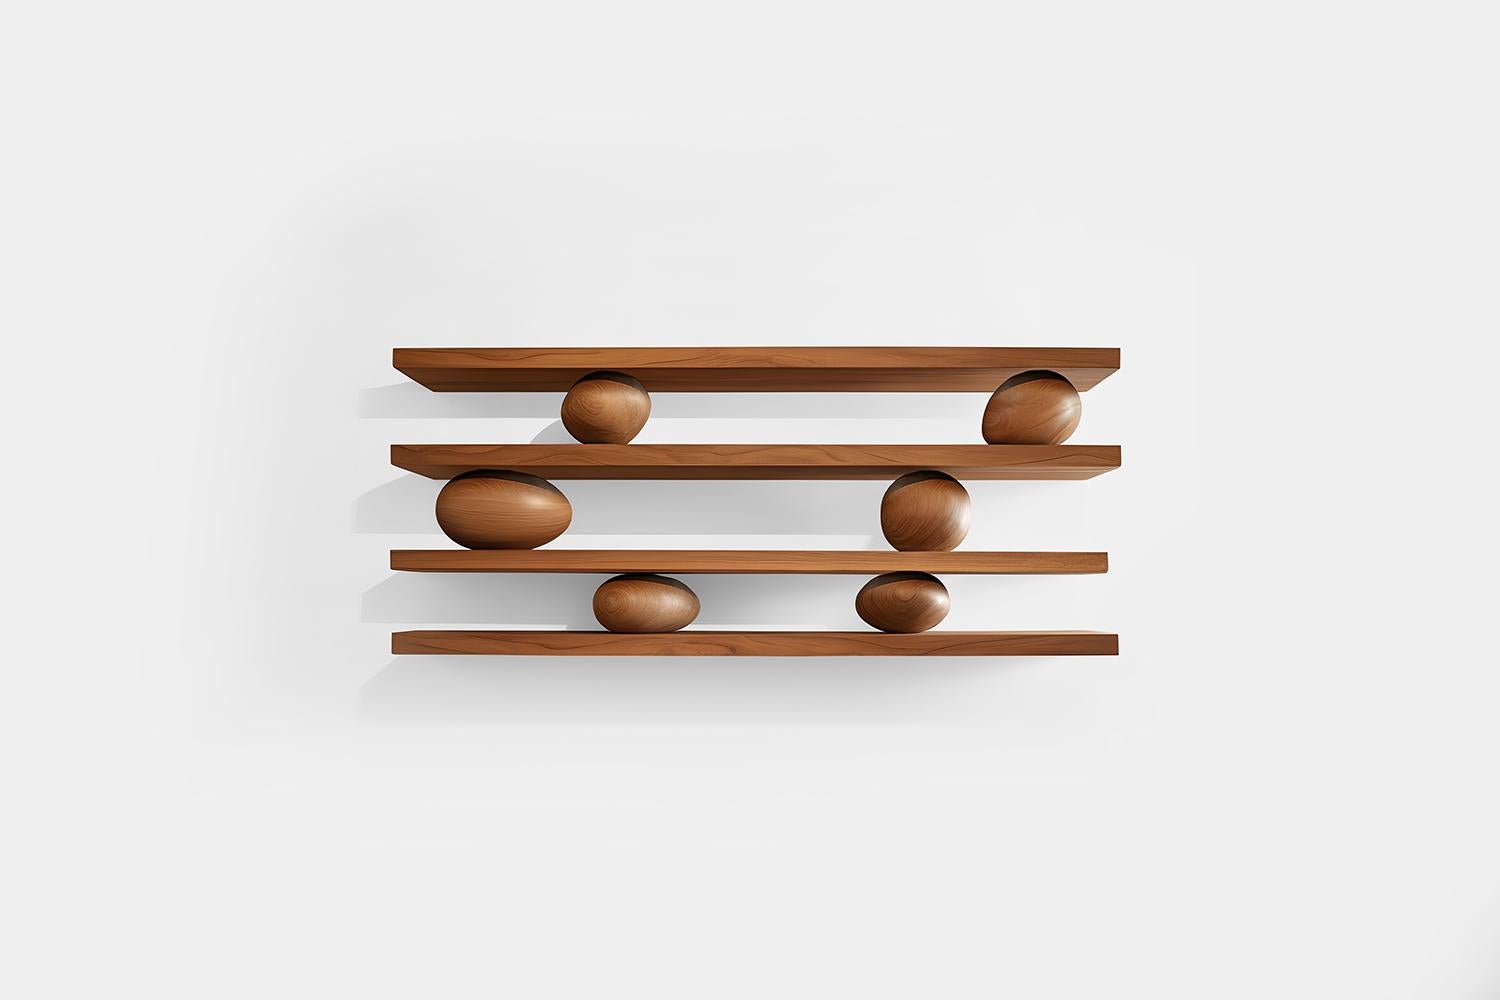 Set of Four Floating Shelves with Six Sculptural Wooden Pebble Accents, Sereno by Joel Escalona

—

What happens when the practical becomes art?
What happens when ornamentation gains significance?

Those were the questions Joel Escalona asked